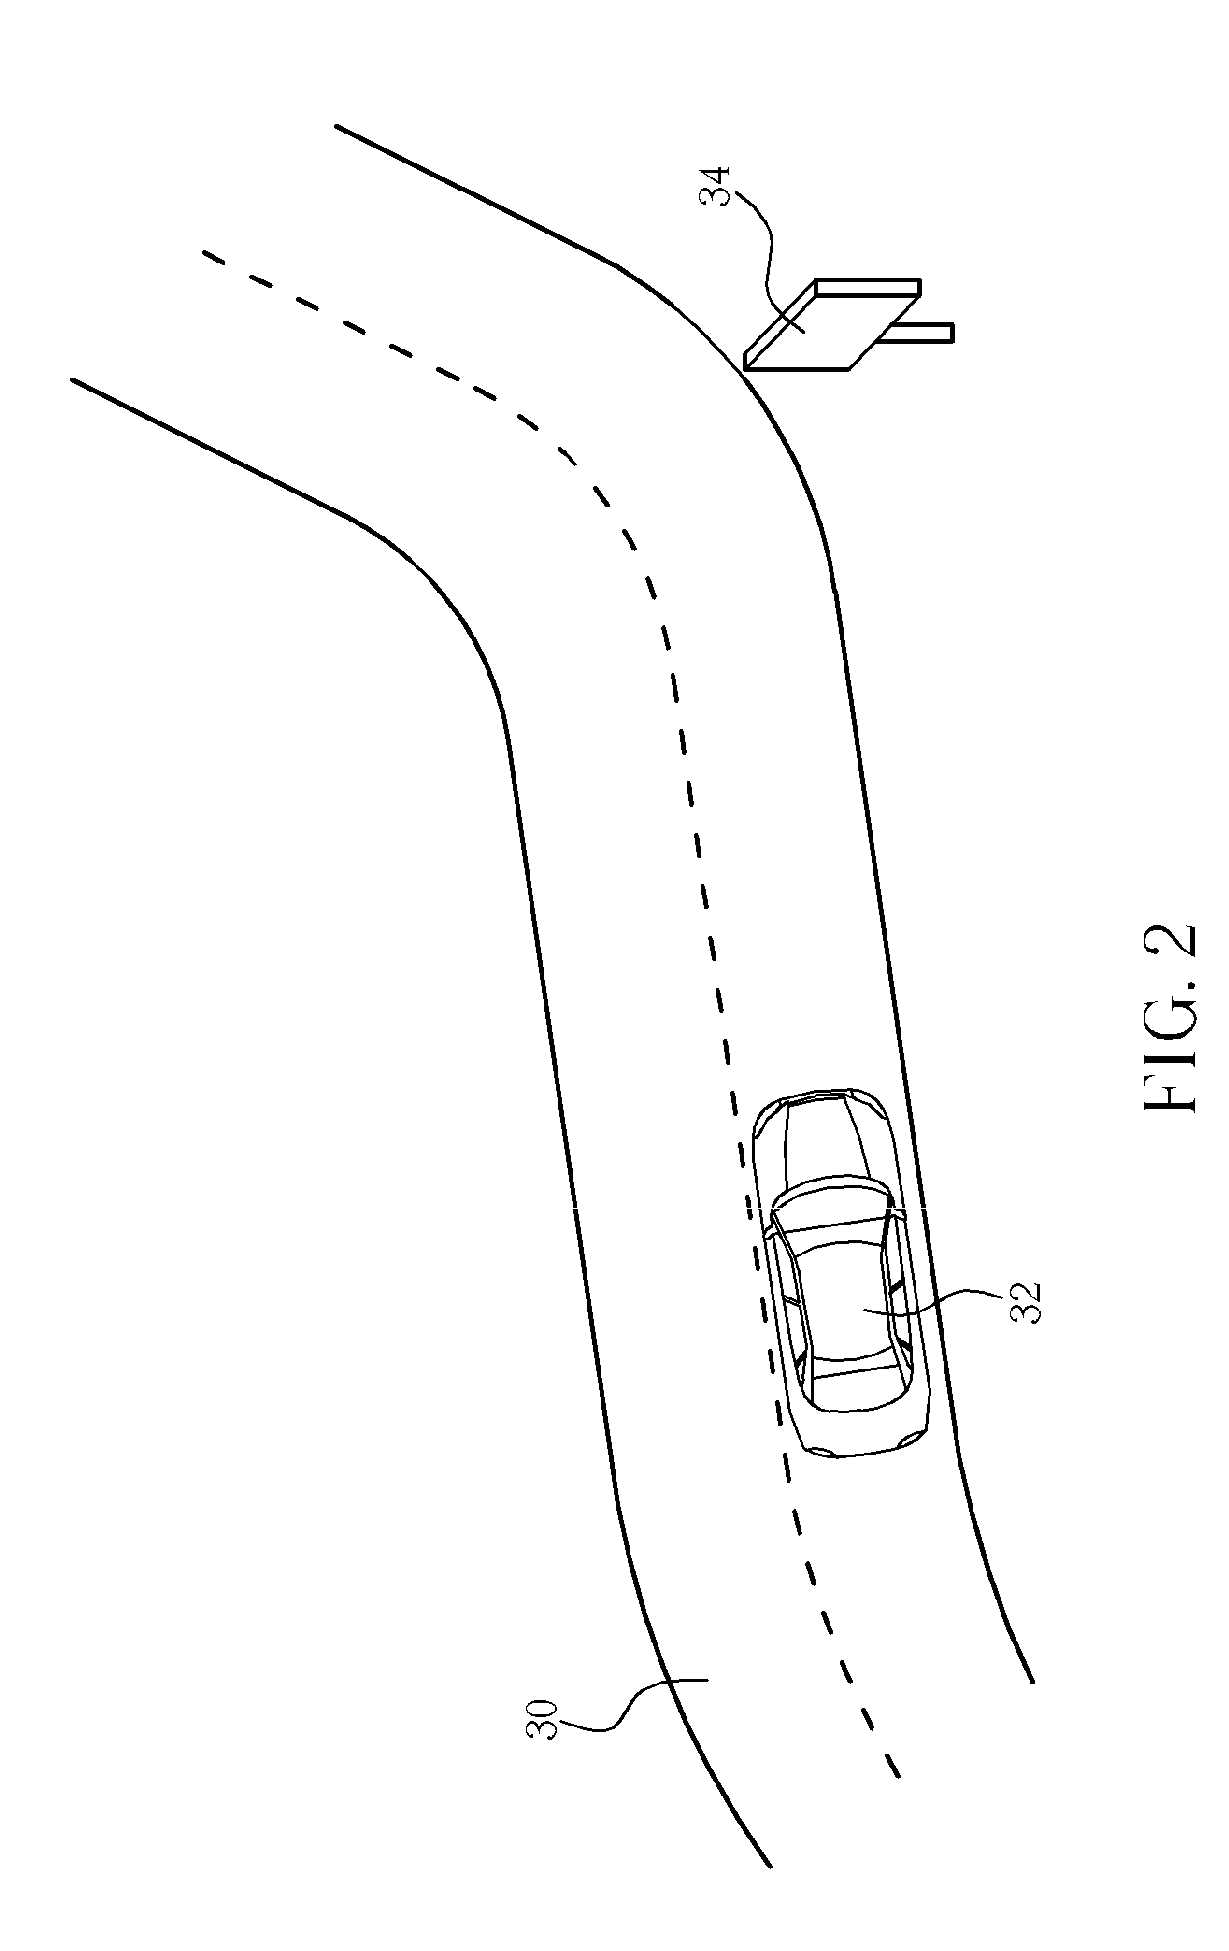 Method of using road signs to augment Global Positioning System (GPS) coordinate data for calculating a current position of a personal navigation device